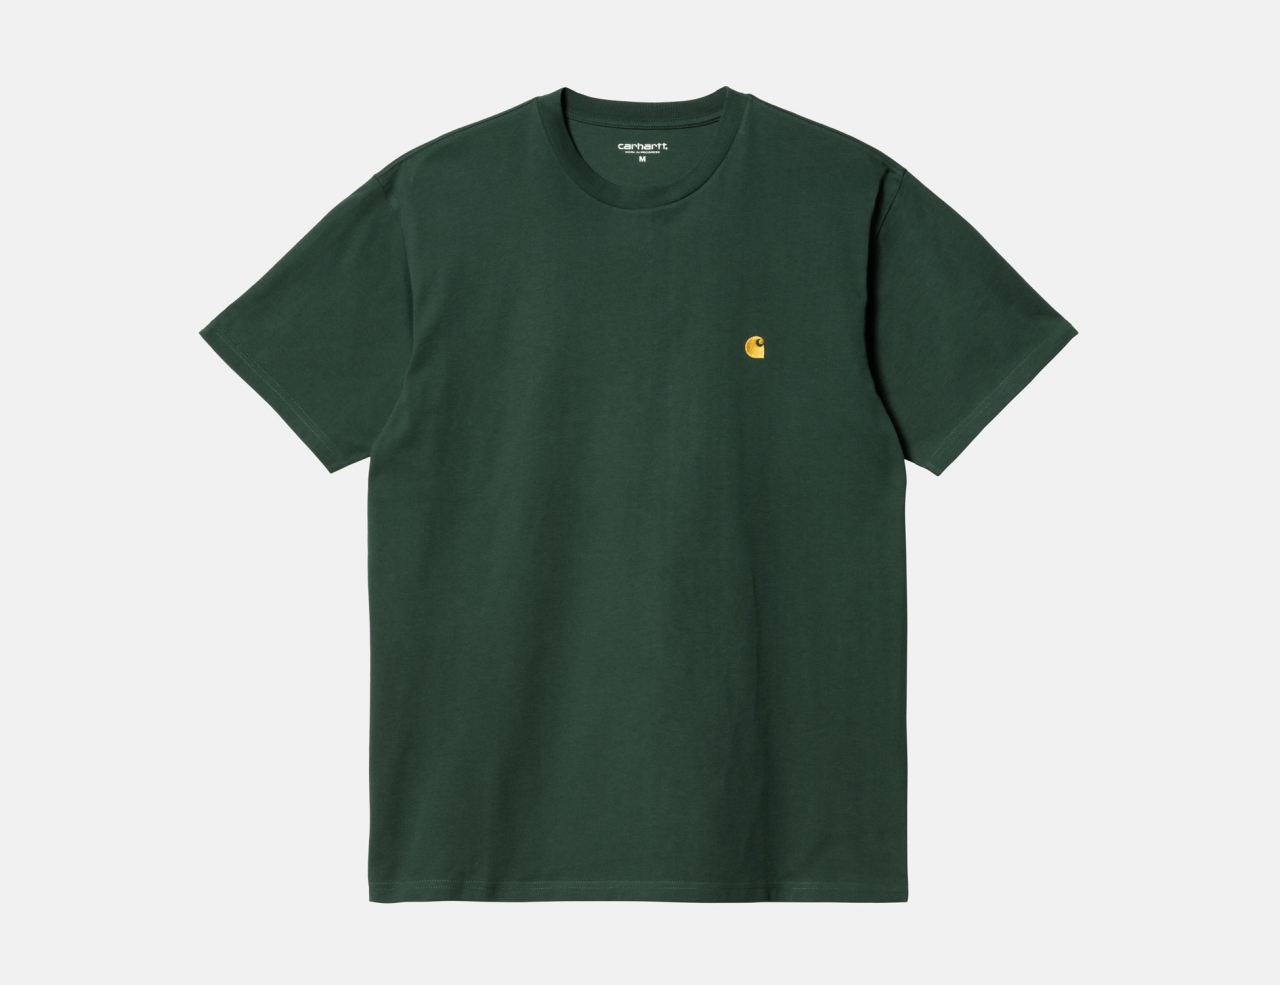 Carhartt WIP Chase T-Shirt - Discovery Green/Gold